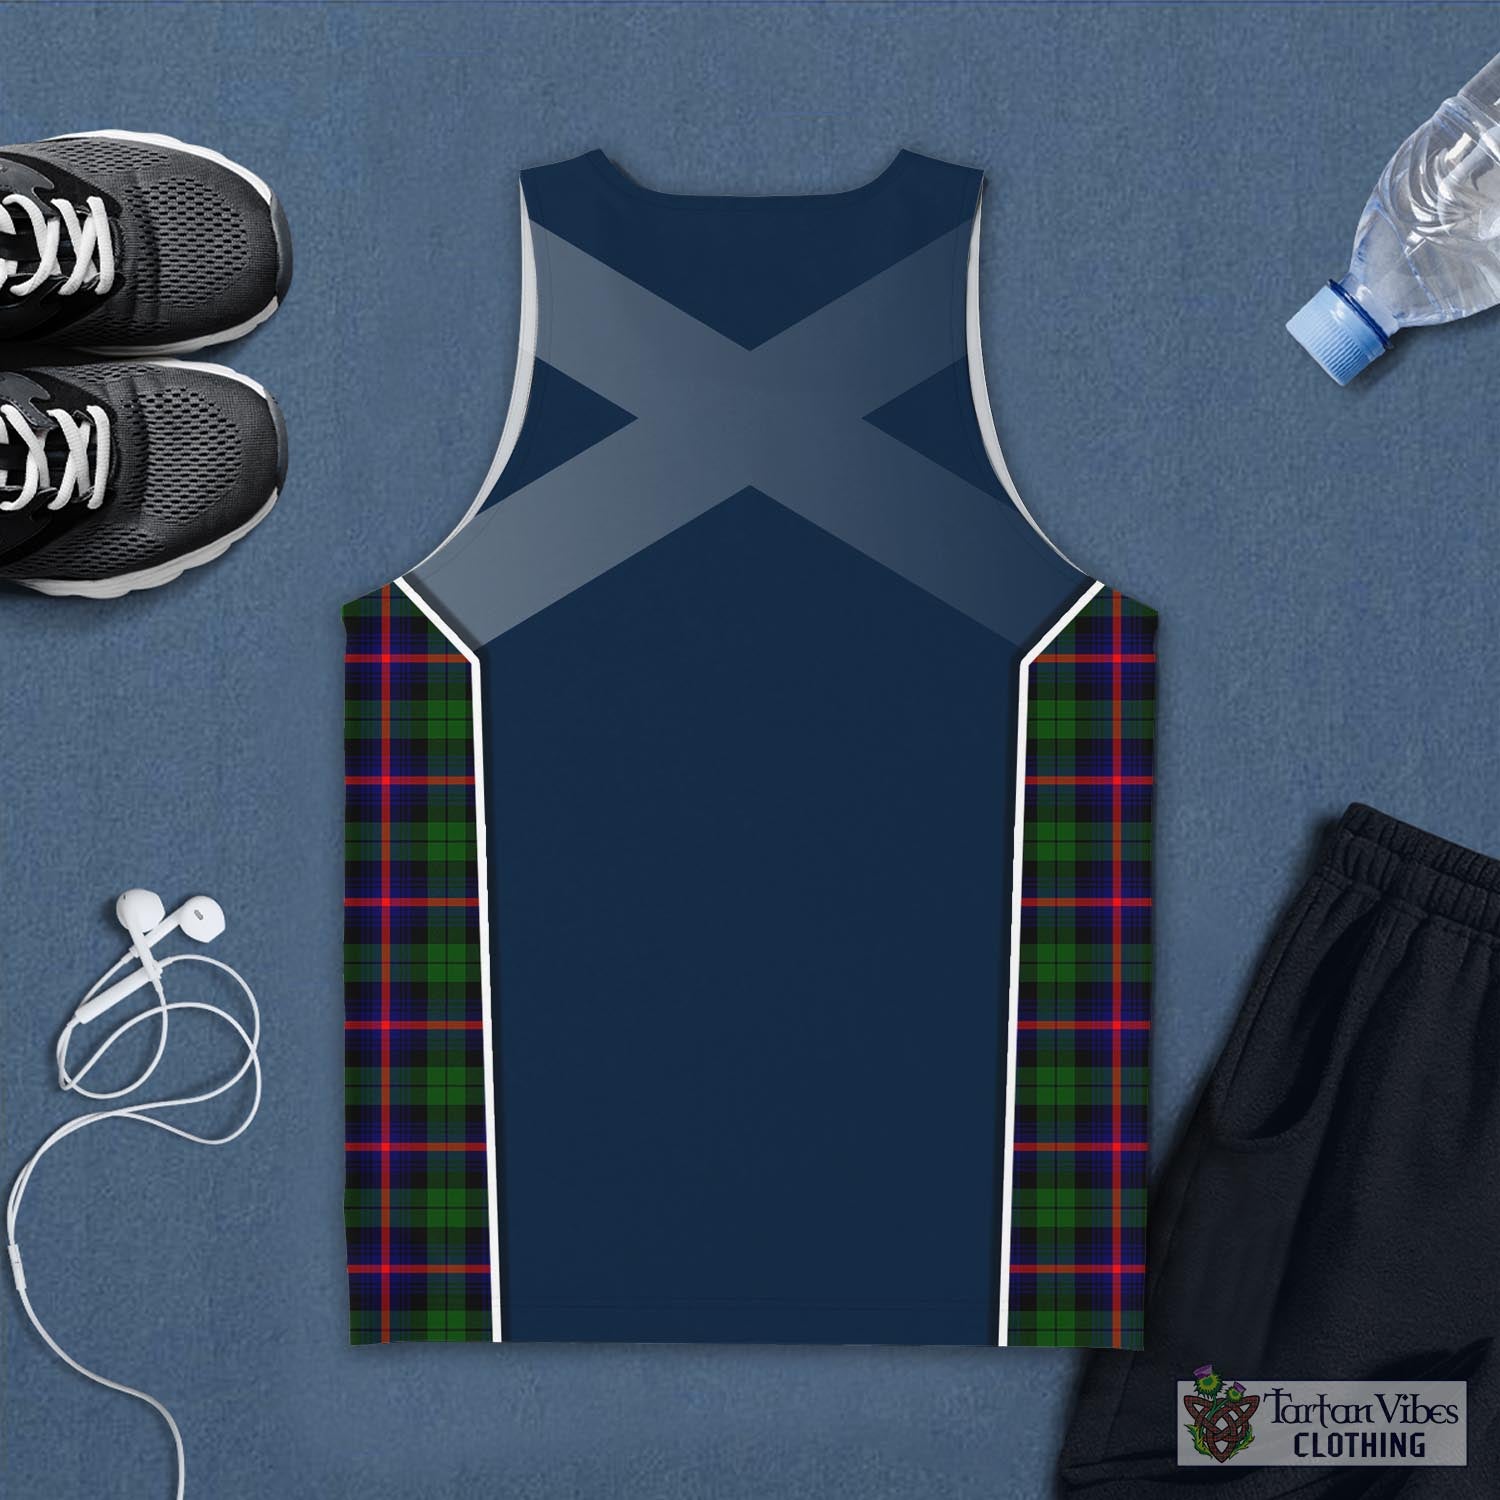 Tartan Vibes Clothing Urquhart Modern Tartan Men's Tanks Top with Family Crest and Scottish Thistle Vibes Sport Style